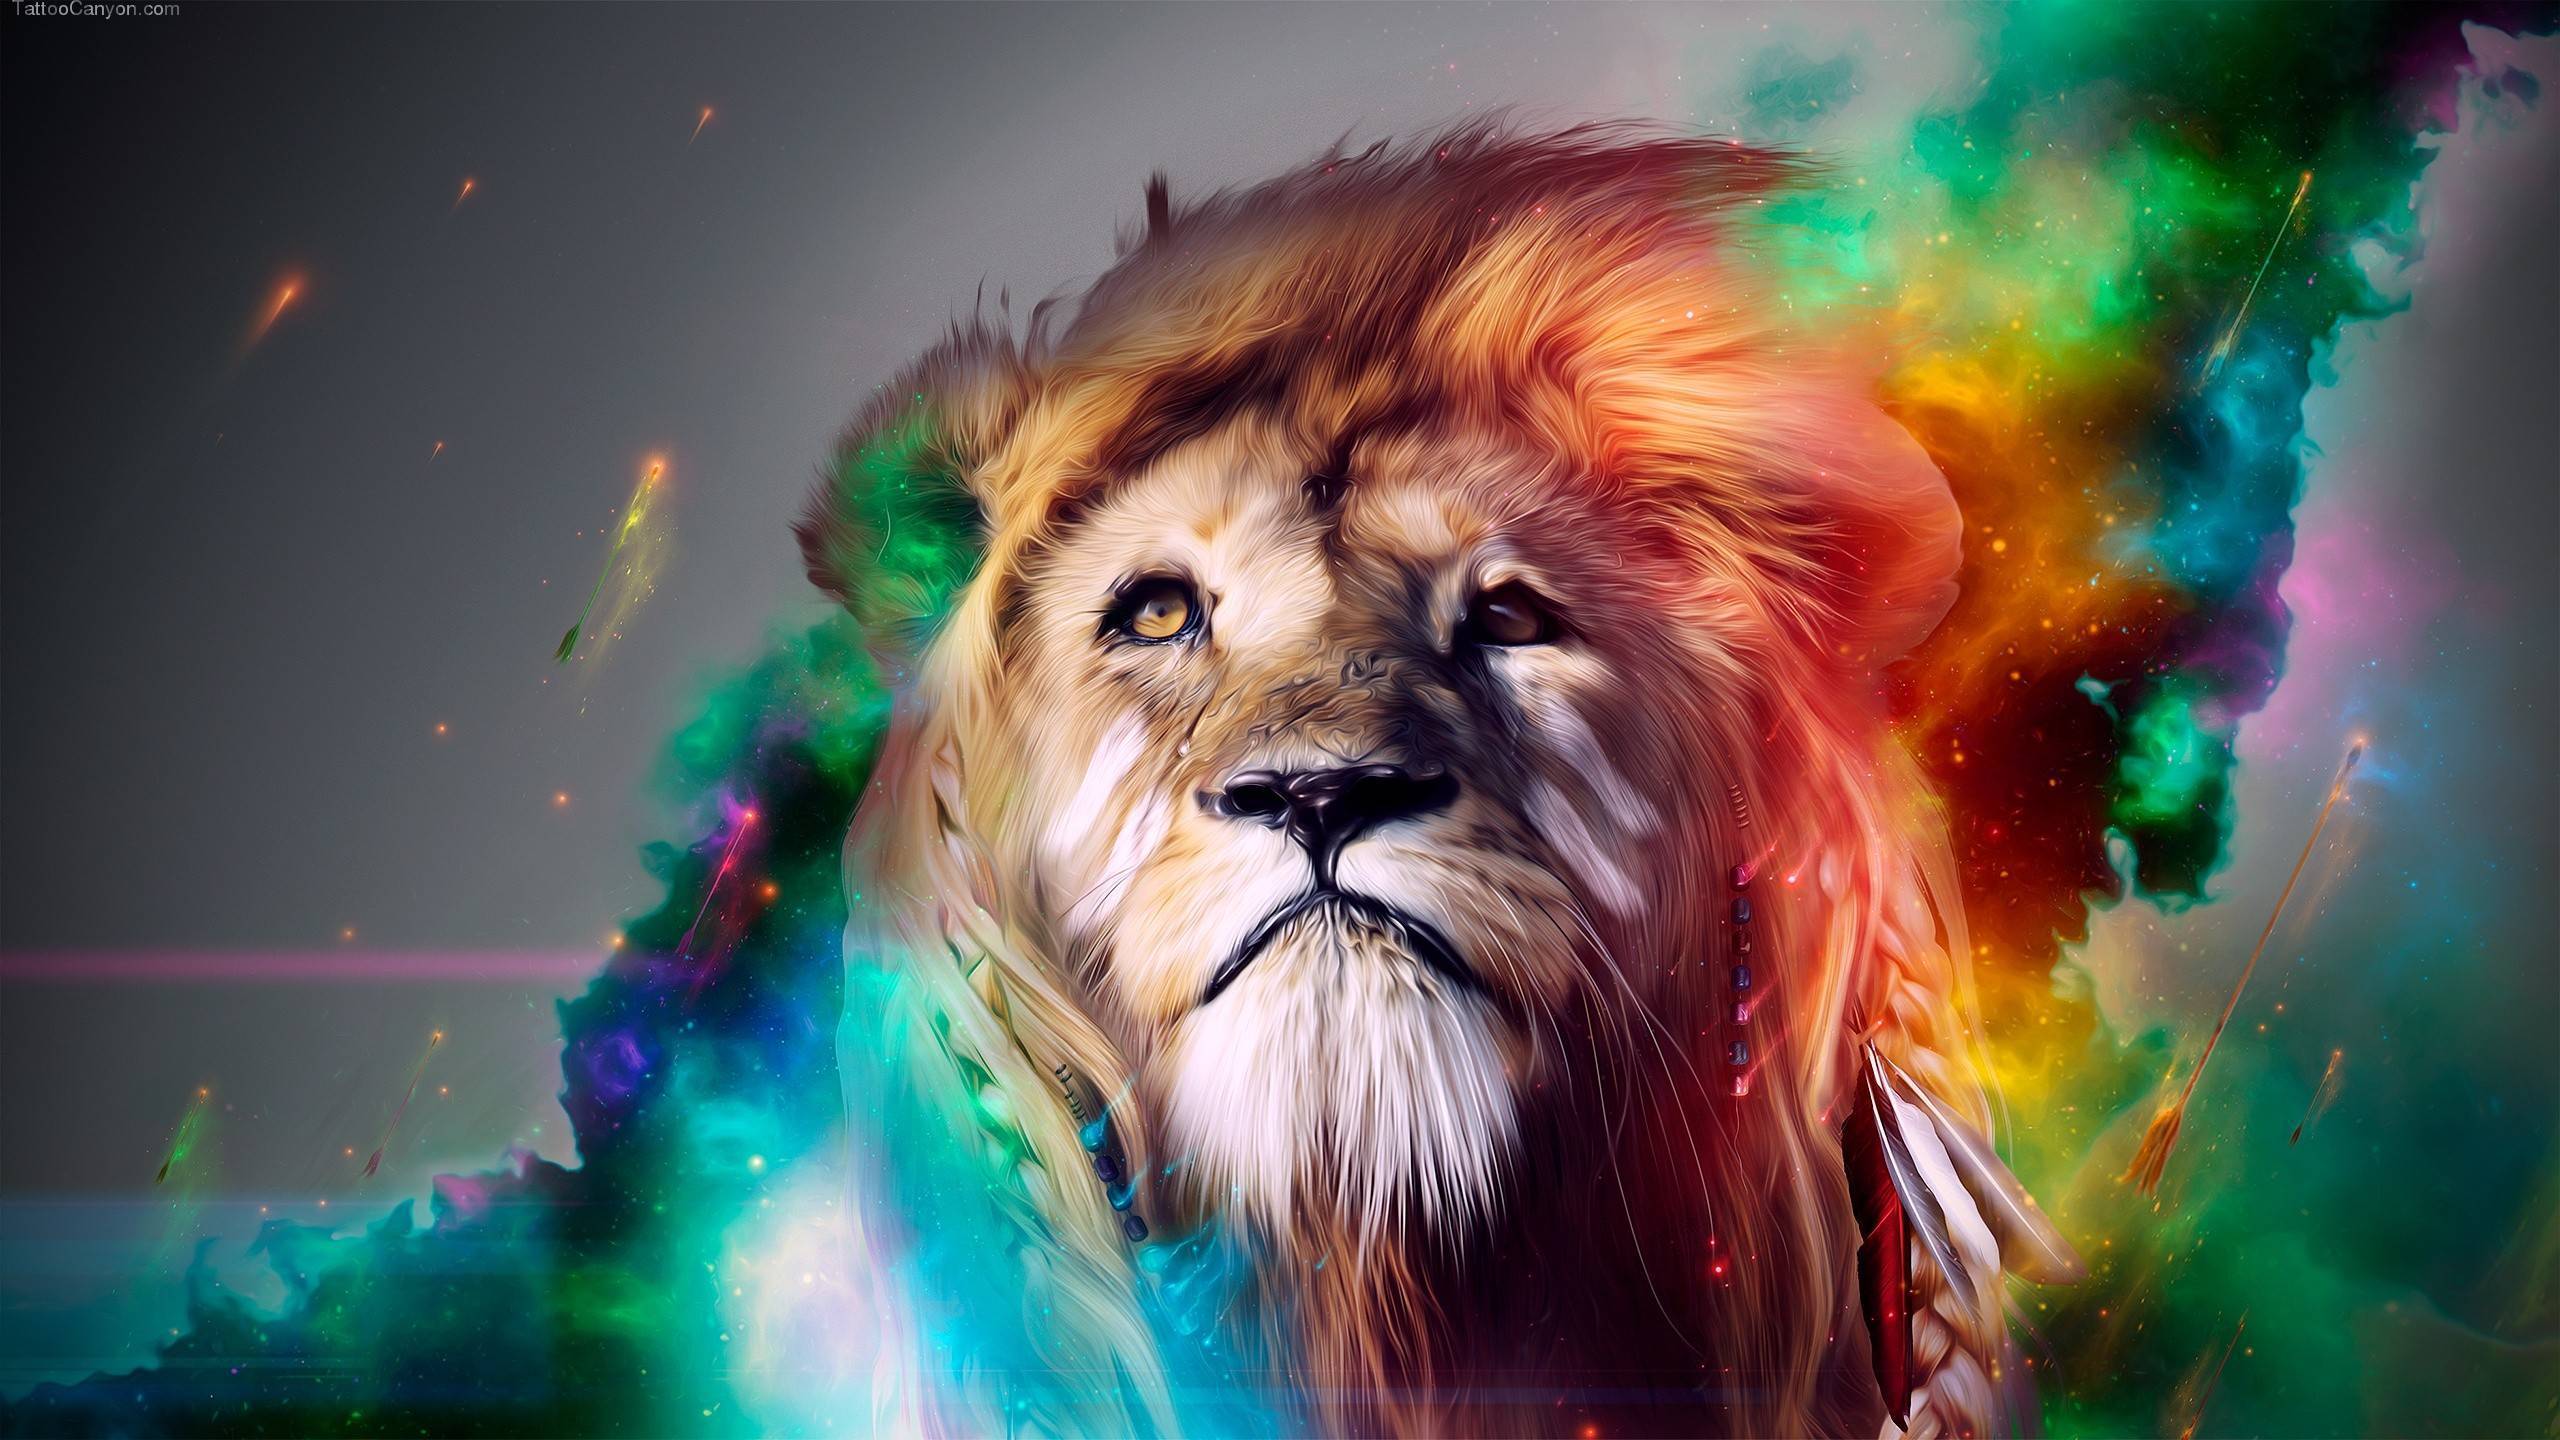 Awesome Lion 4k Background Wallpapers